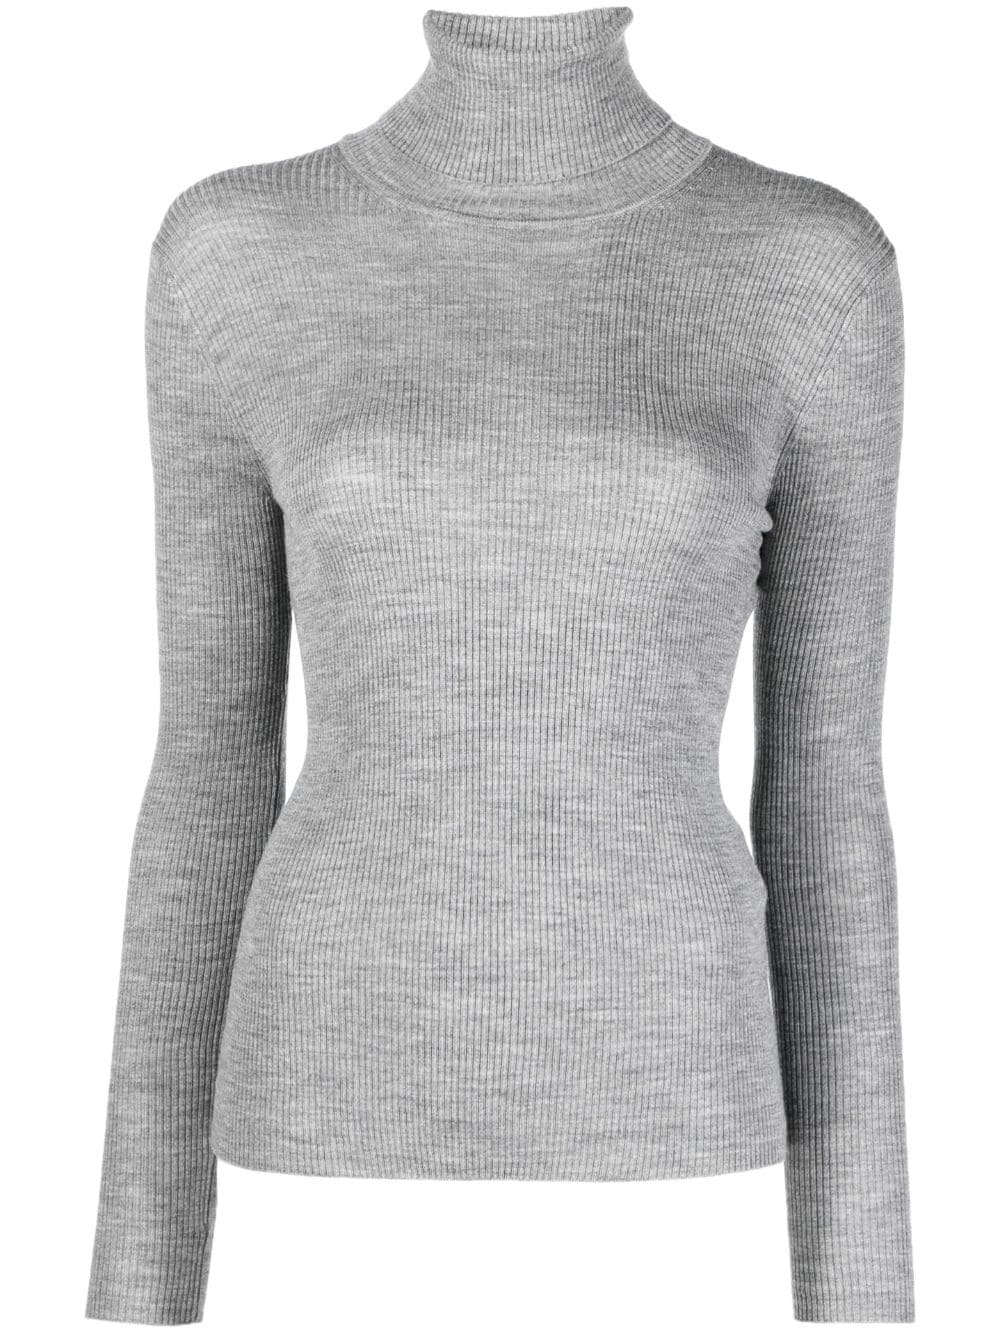 P.A.R.O.S.H. high-neck ribbed-knit wool top - Grey von P.A.R.O.S.H.